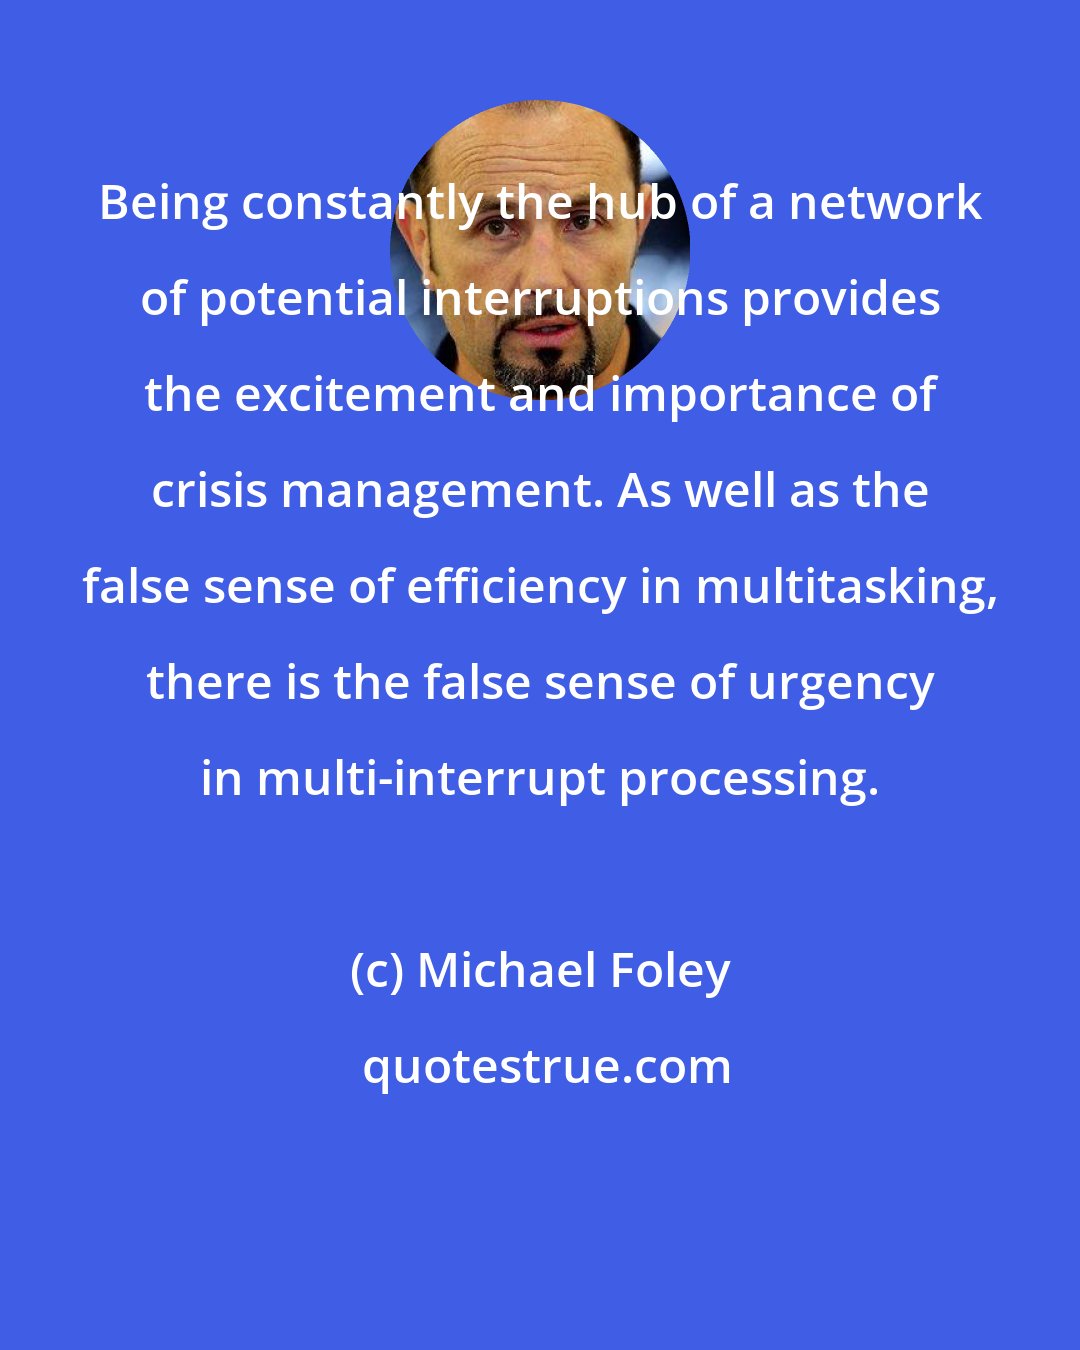 Michael Foley: Being constantly the hub of a network of potential interruptions provides the excitement and importance of crisis management. As well as the false sense of efficiency in multitasking, there is the false sense of urgency in multi-interrupt processing.